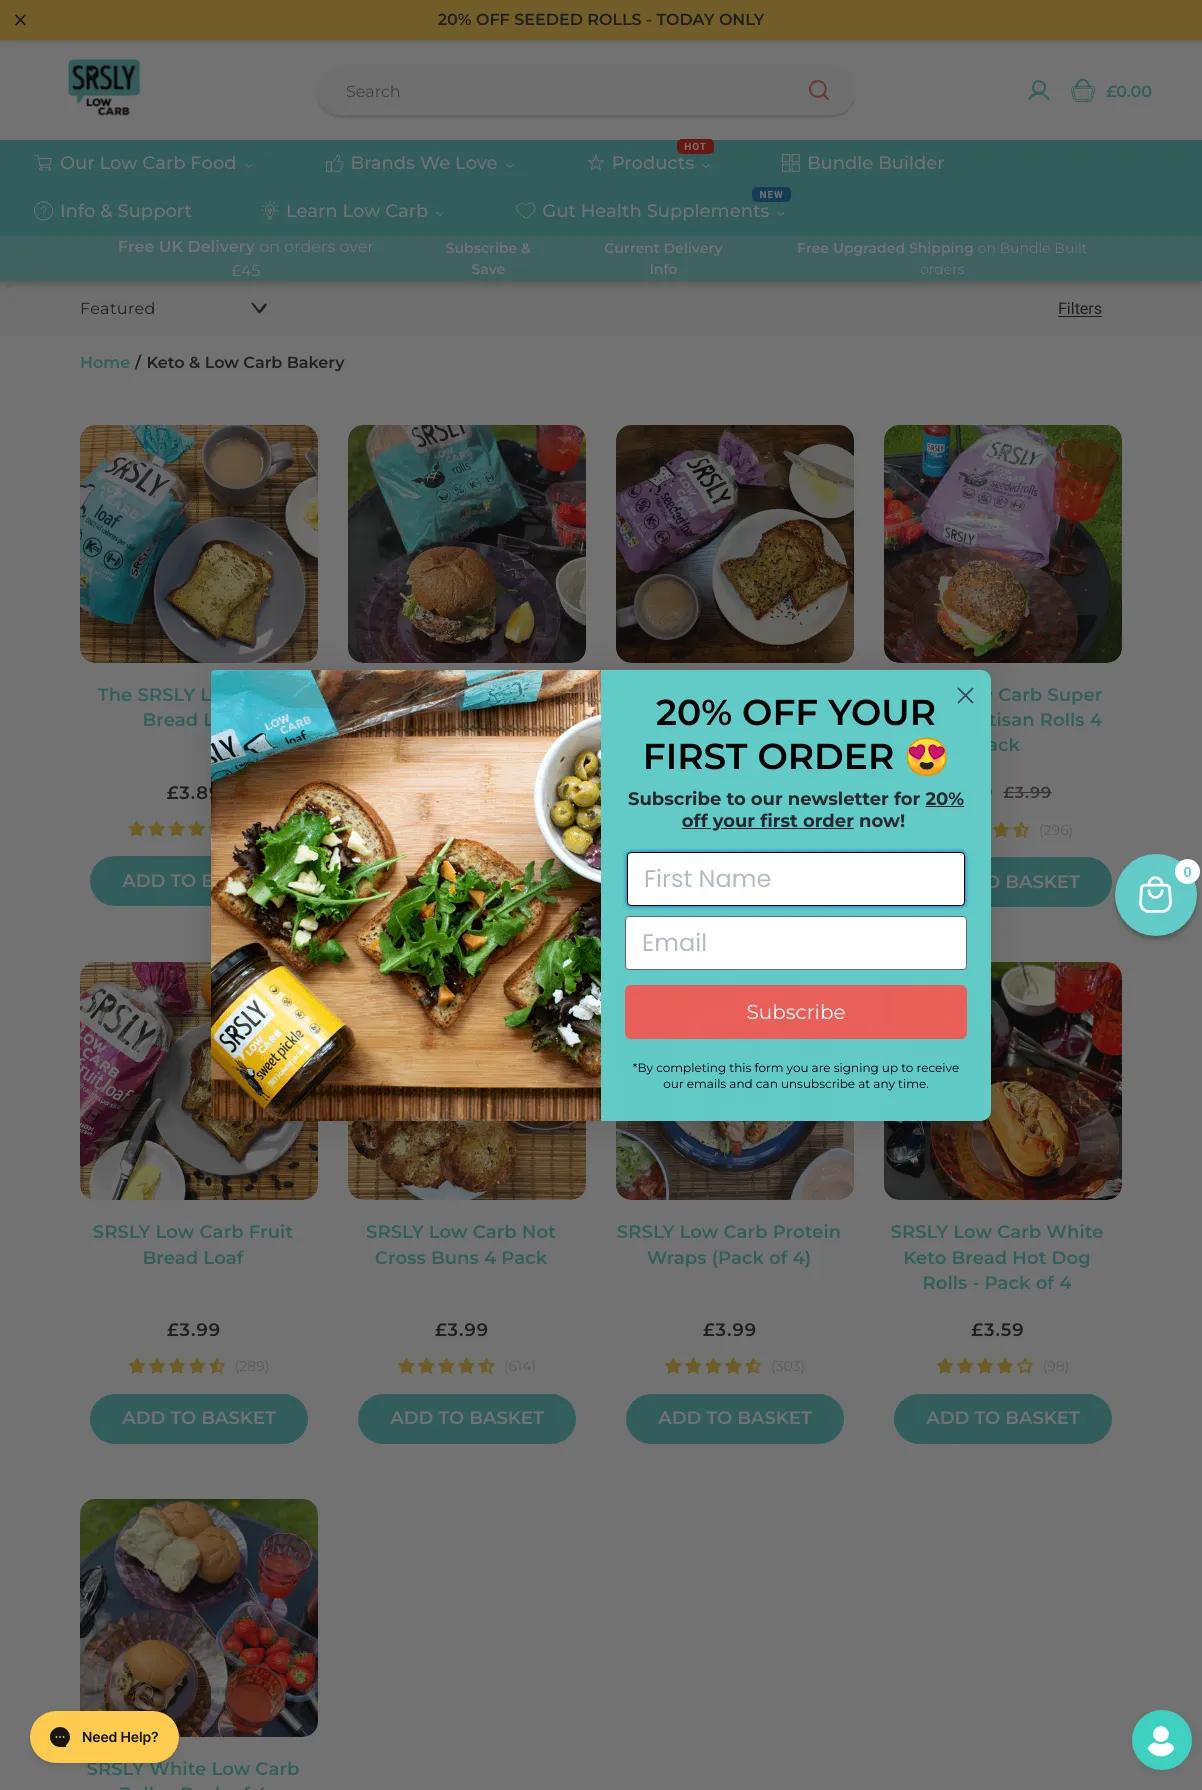 Screenshot 2 of Seriously Low Carb (Example Shopify Food and Beverage Website)